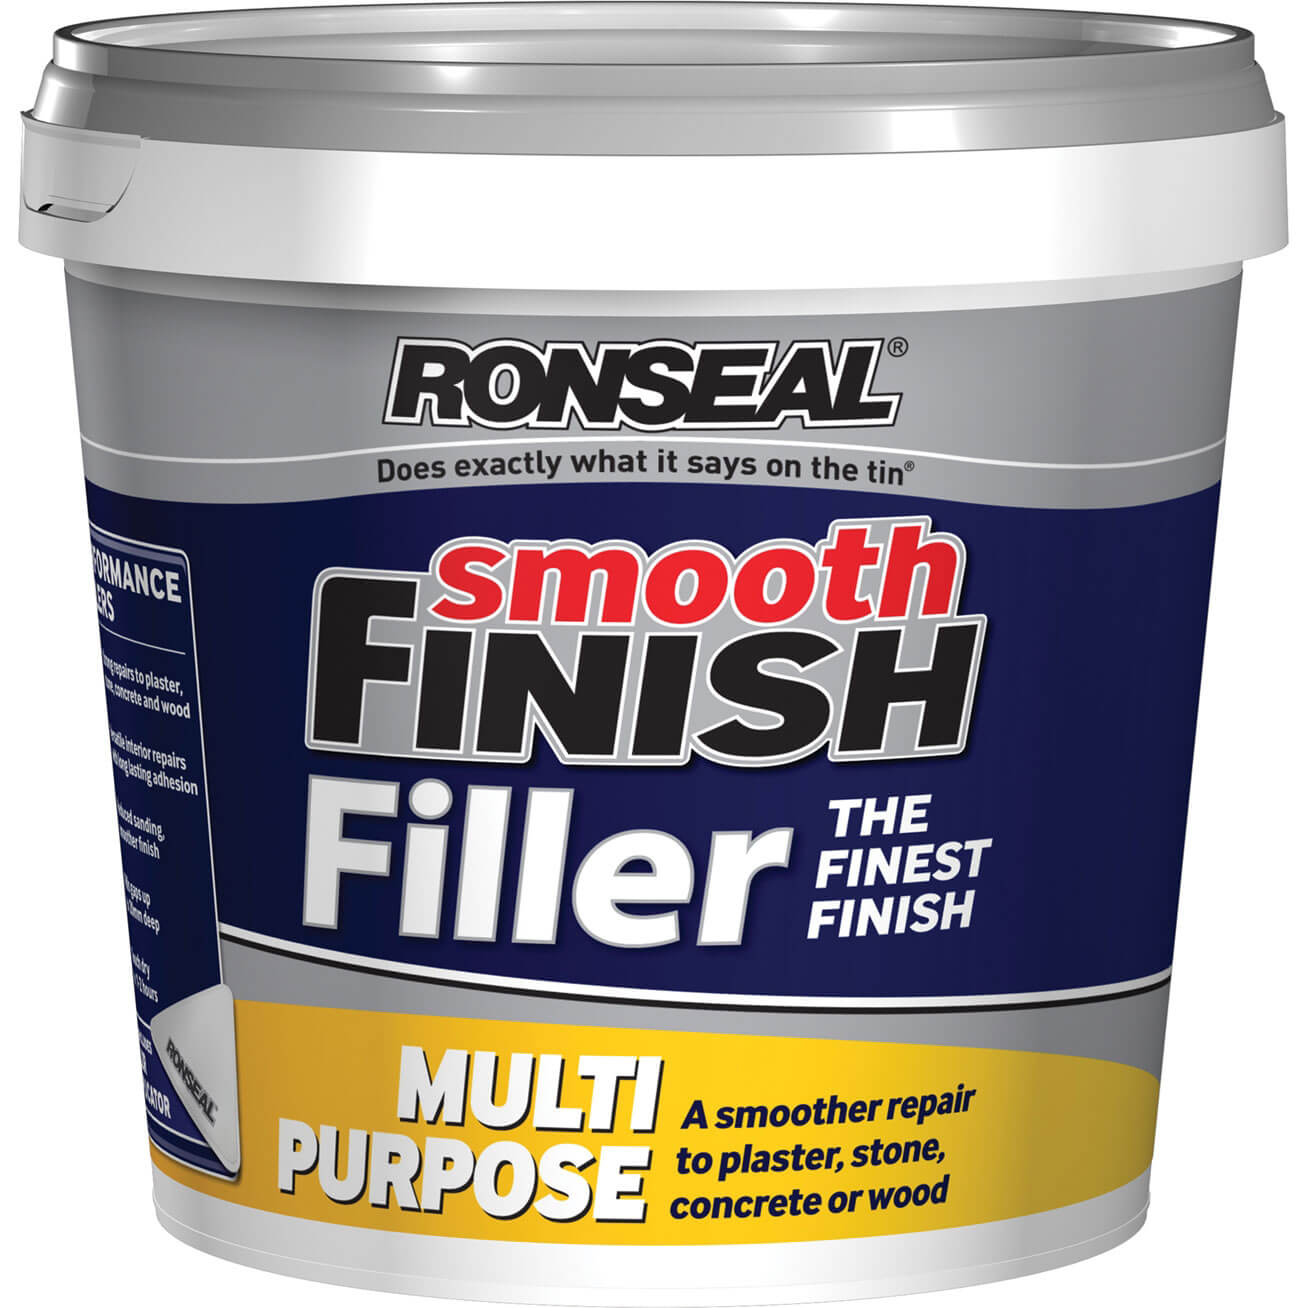 Image of Ronseal Smooth Finish Multi Purpose Interior Wall Ready Mix Filler 2.2kg